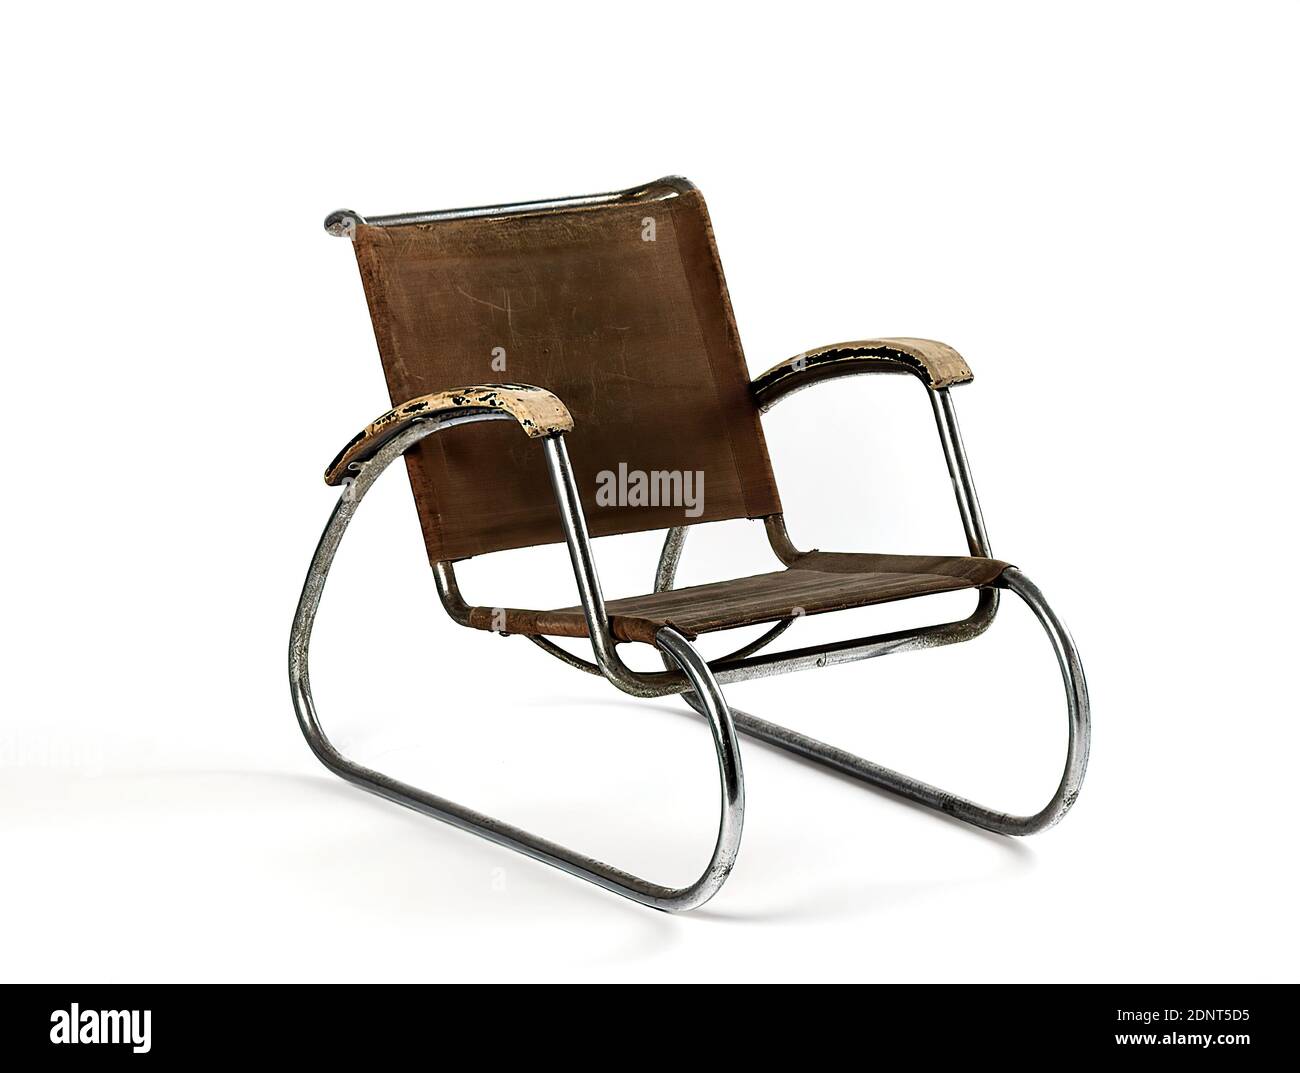 Erich Dieckmann, Cebaso, armchair (prev. model 8239), steel, cotton, nickel-plated, chrome-plated, tubular steel, nickel-plated and chrome-plated, with iron yarn belt covering, Total: Height: 71 cm; Width: 60 cm; Depth: 92 cm, unmarked, armchairs, armchair, seating, furniture, Bauhaus Stock Photo